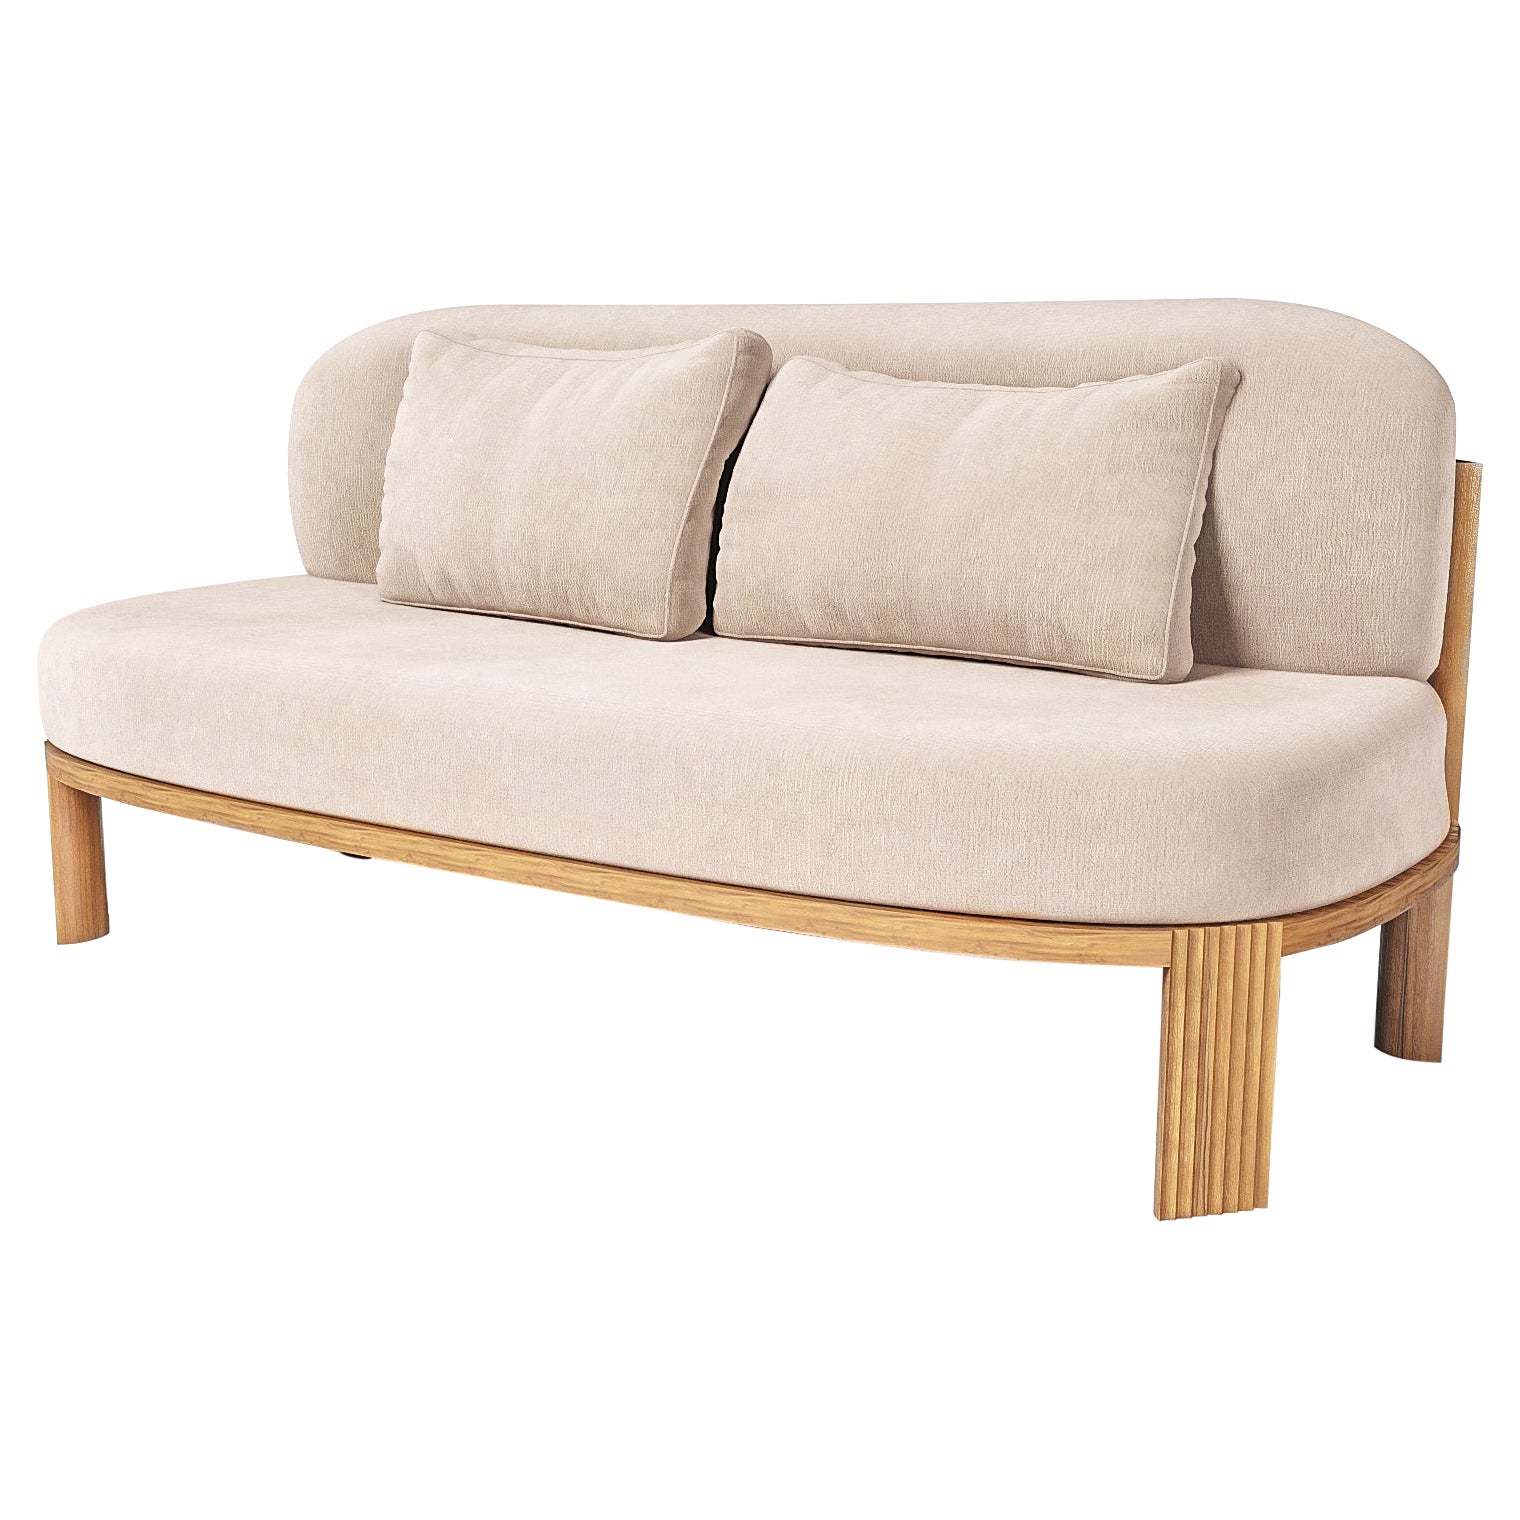 Contemporary Modern European 111 Sofa in Cream Fabric & Oak Wood by Collector For Sale